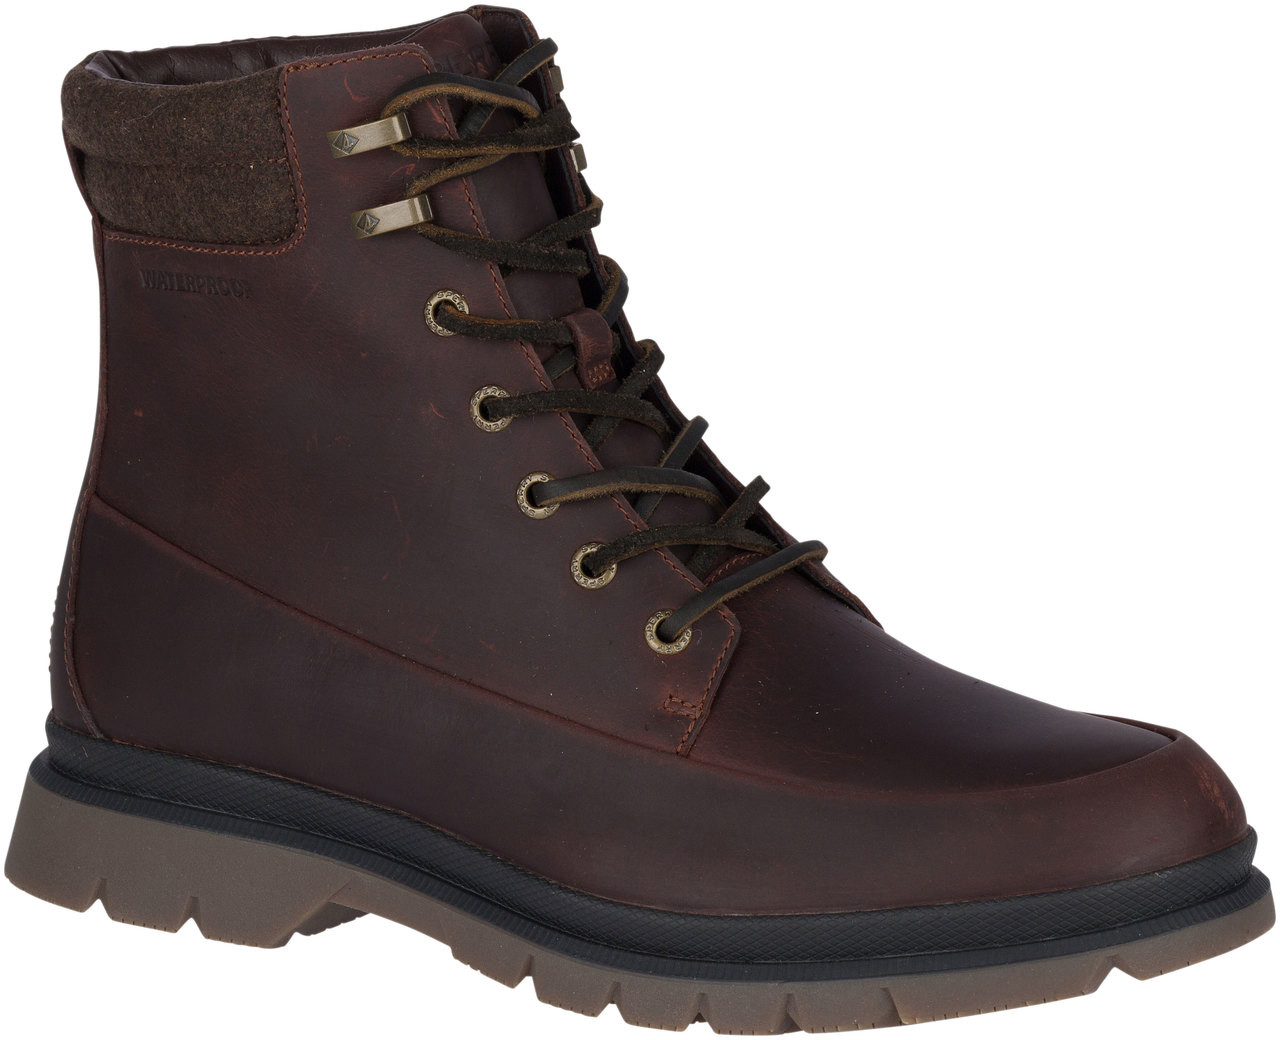 Sperry Men's Watertown Boot - FREE Shipping & FREE Returns - Men's Boots